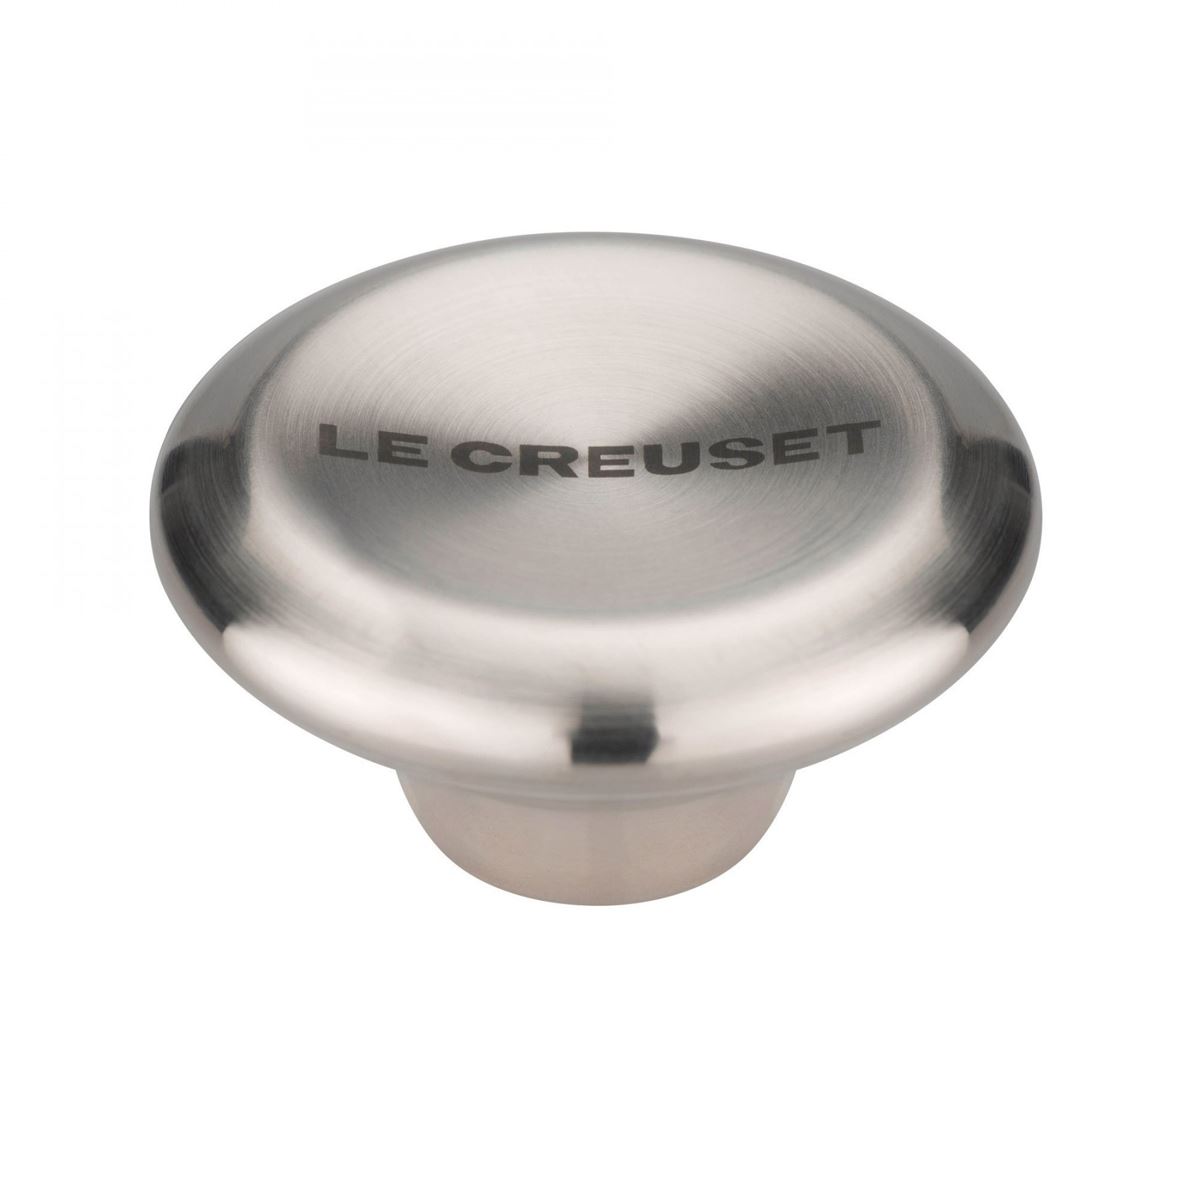 Le Creuset Signature Stainless Steel 47mm Knob Questions & Answers